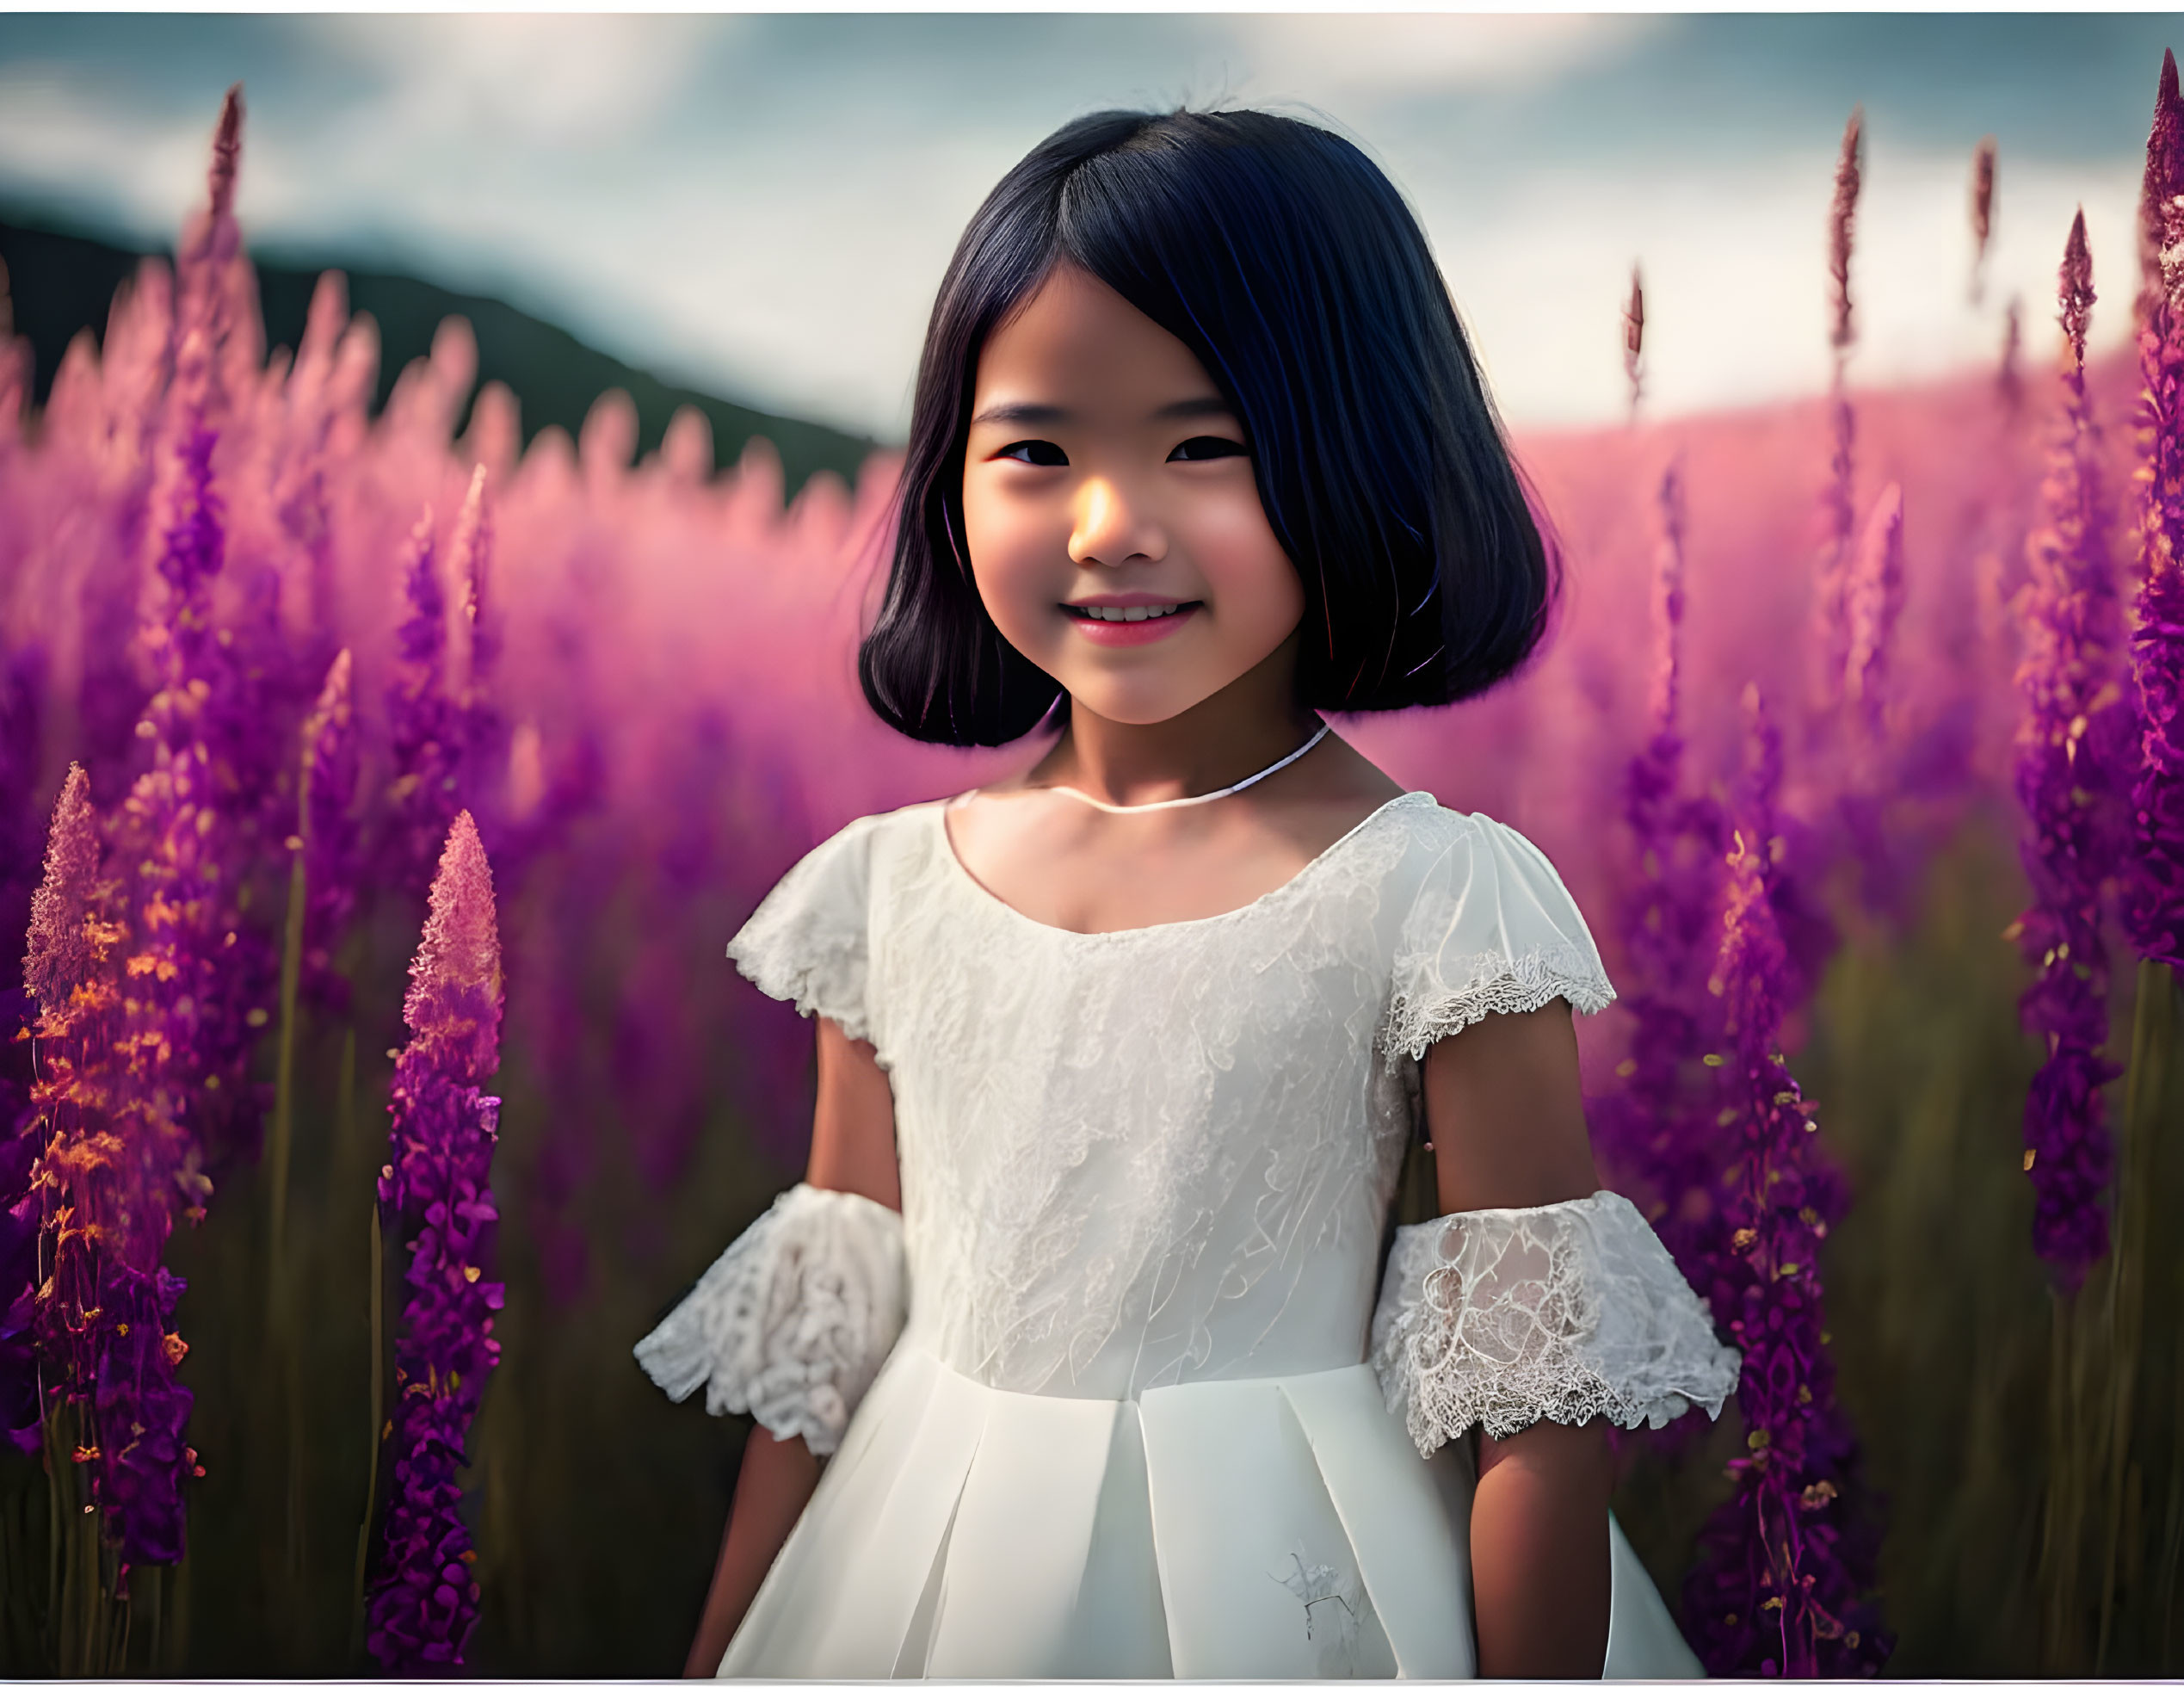 Young girl in white dress surrounded by purple flowers and mountain backdrop.